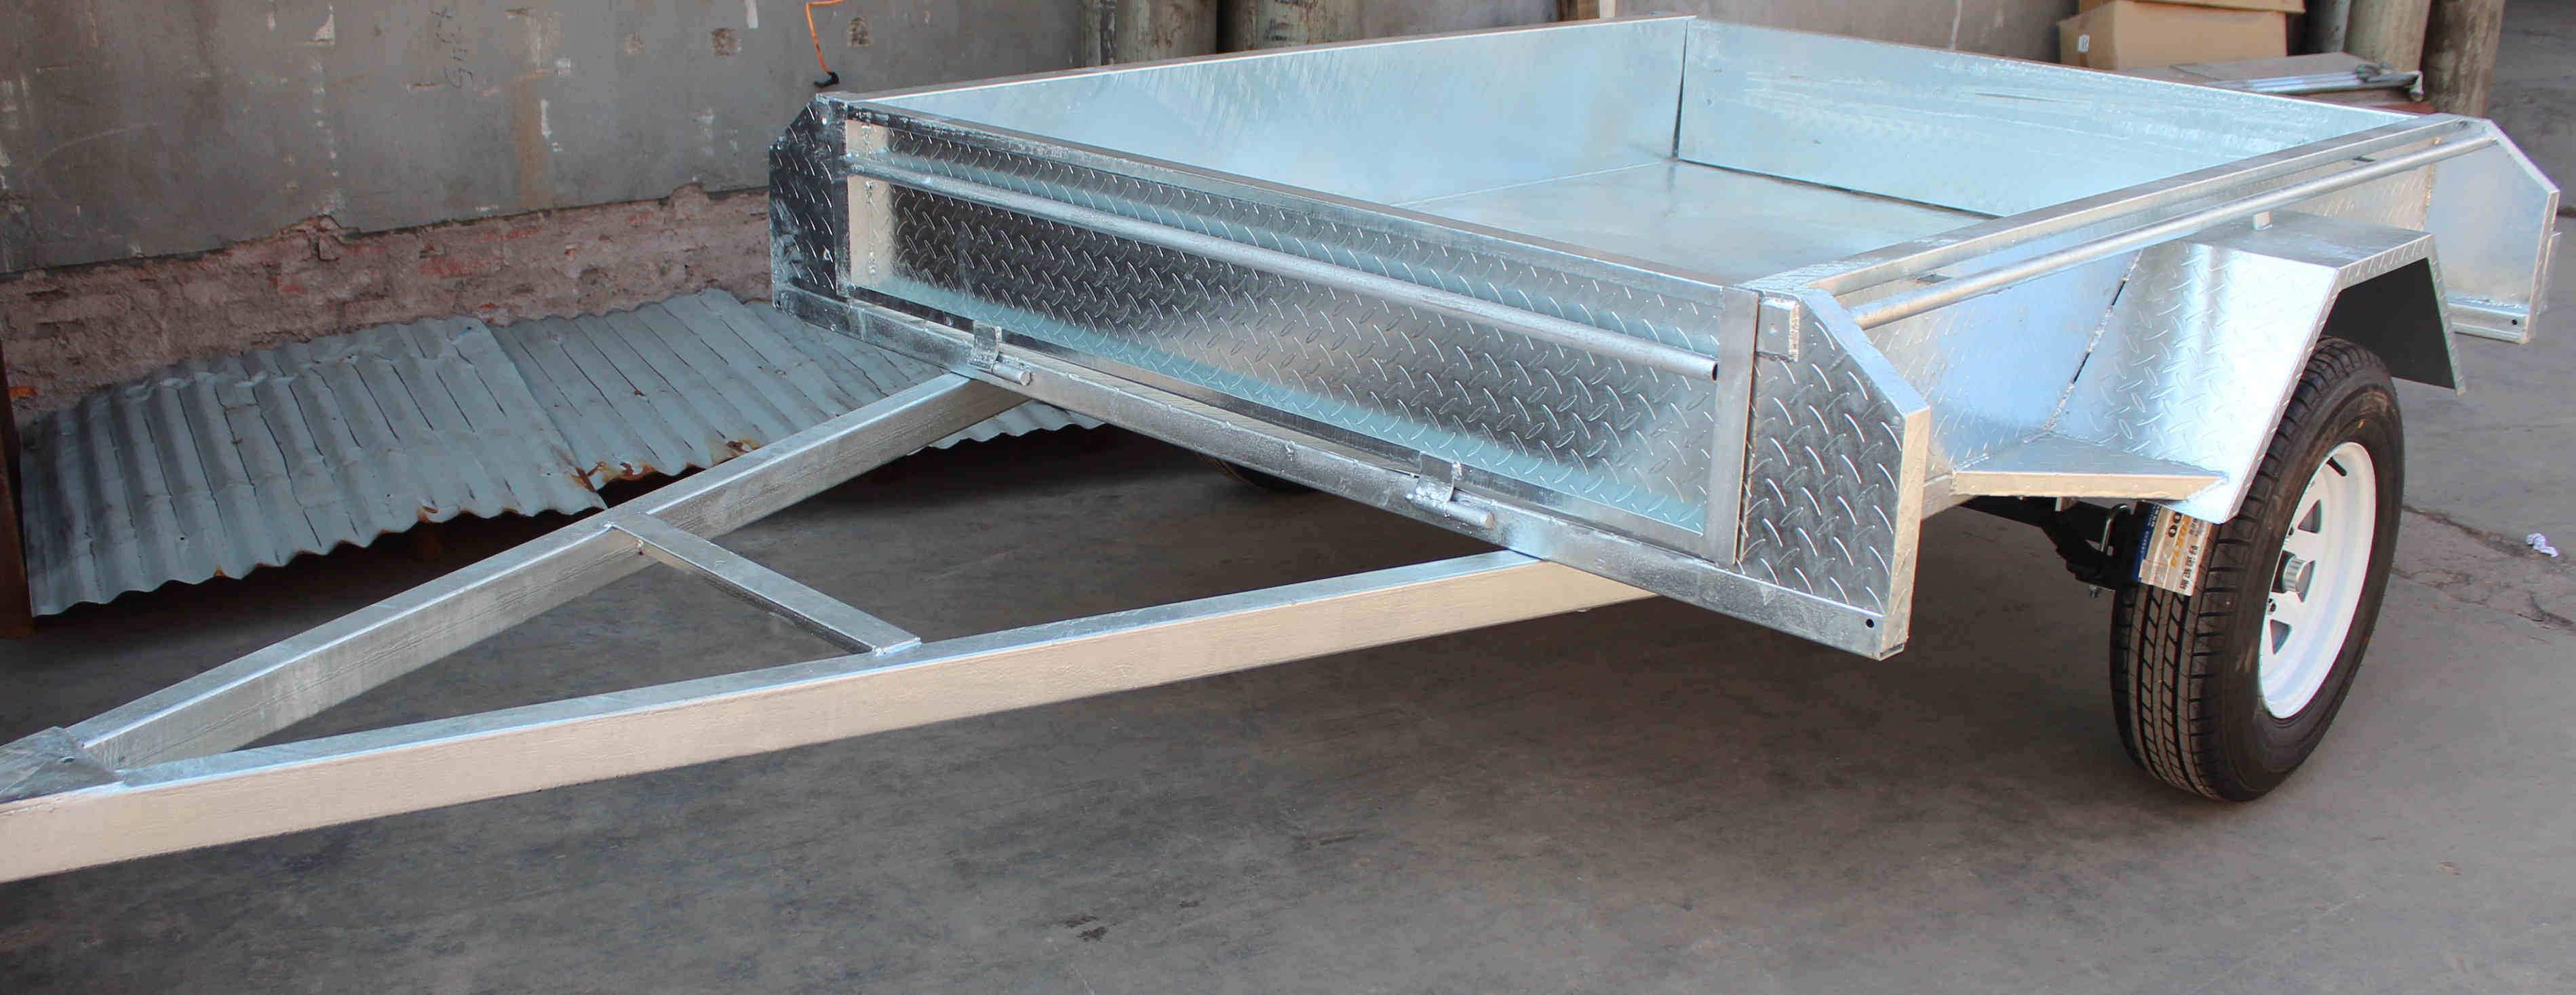 6*4 Box Trailer for Sale with Hot Dipped Galvanized Trailer